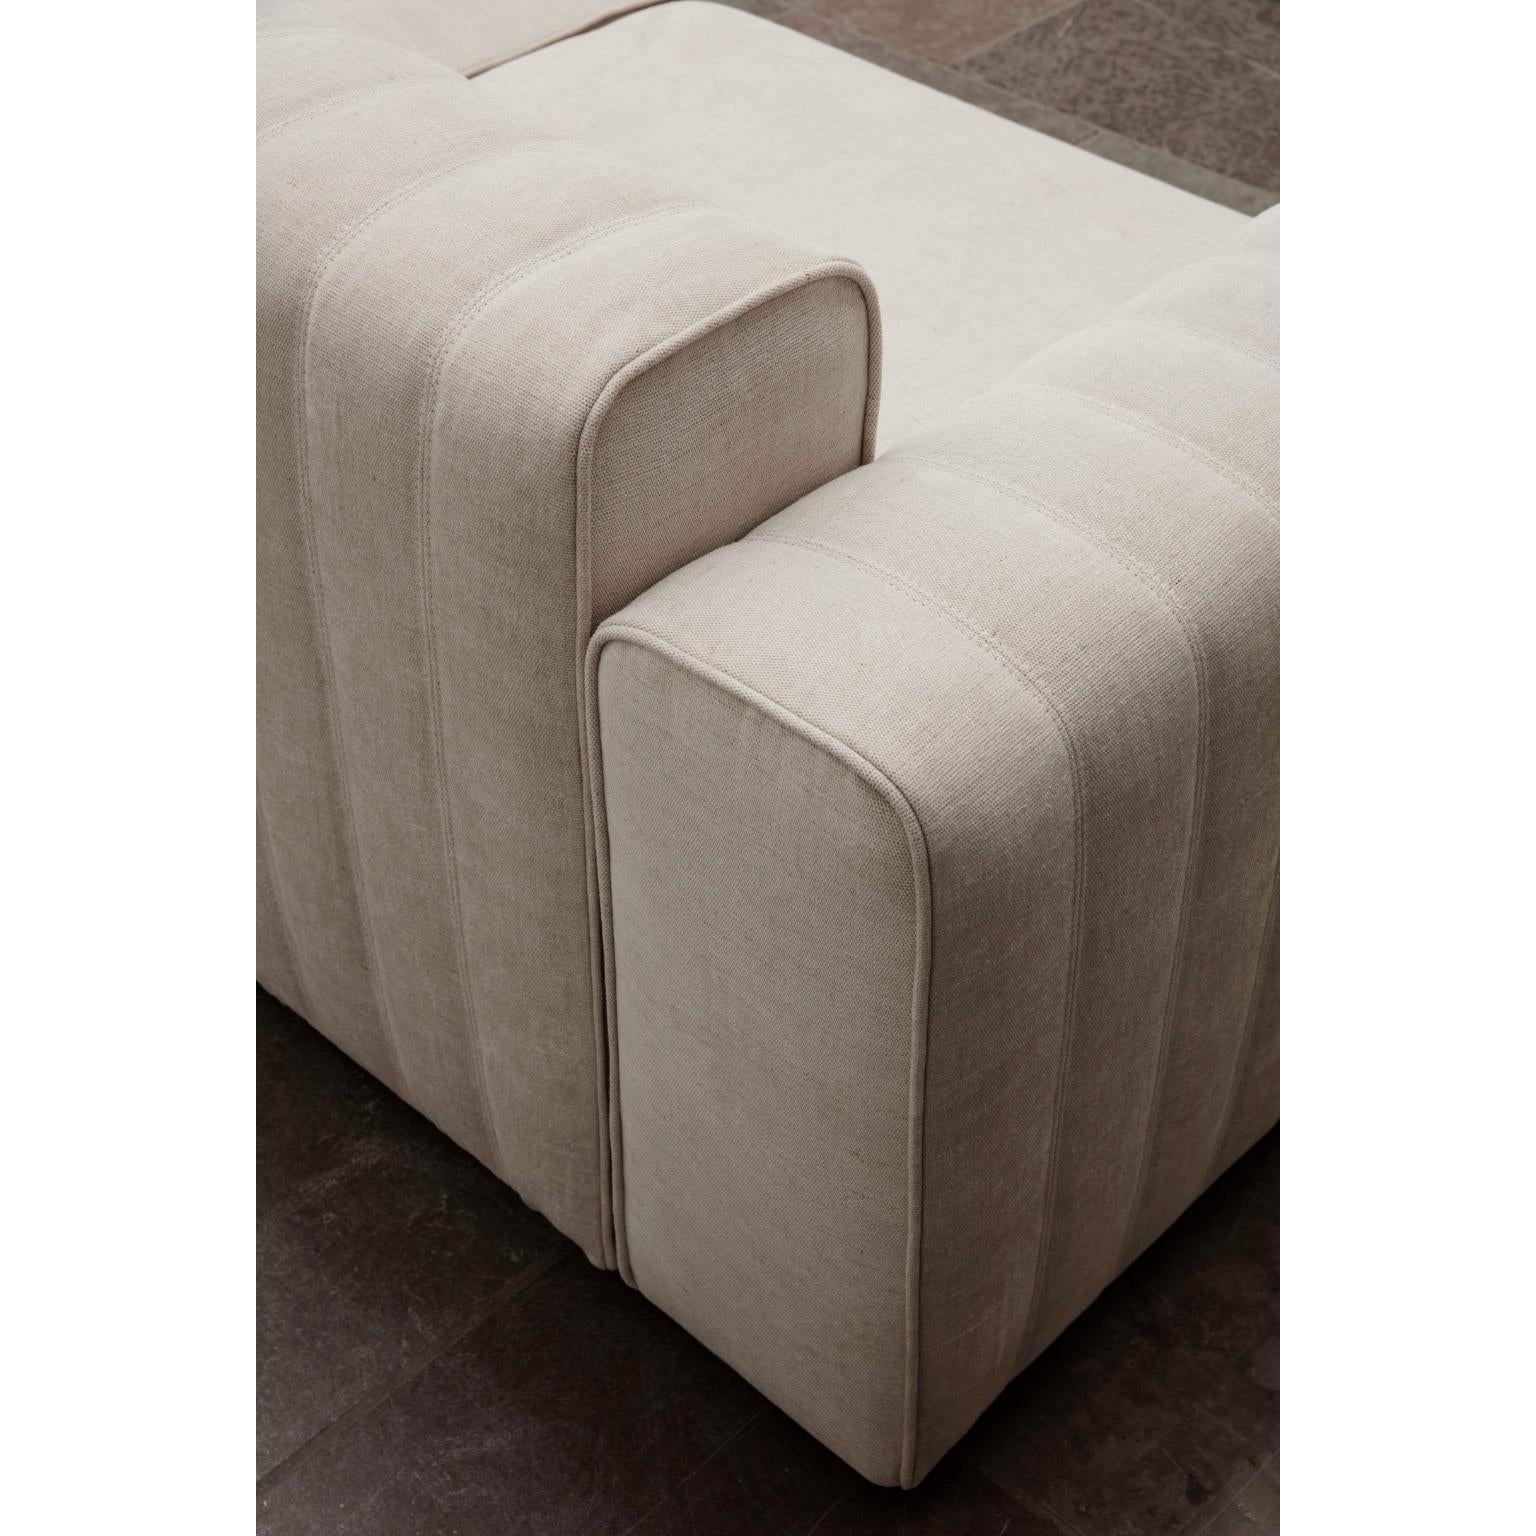 Riff Sofa by NORR11
Dimensions: D 277/92 x W 277 x H 70 cm. SH: 42 cm.
Materials: Foam, plywood and upholstery.
Upholstery: Barnum Boucle Color 3.

Available in a variety of fabrics and custom materials. Prices may vary. Deep seating and generous